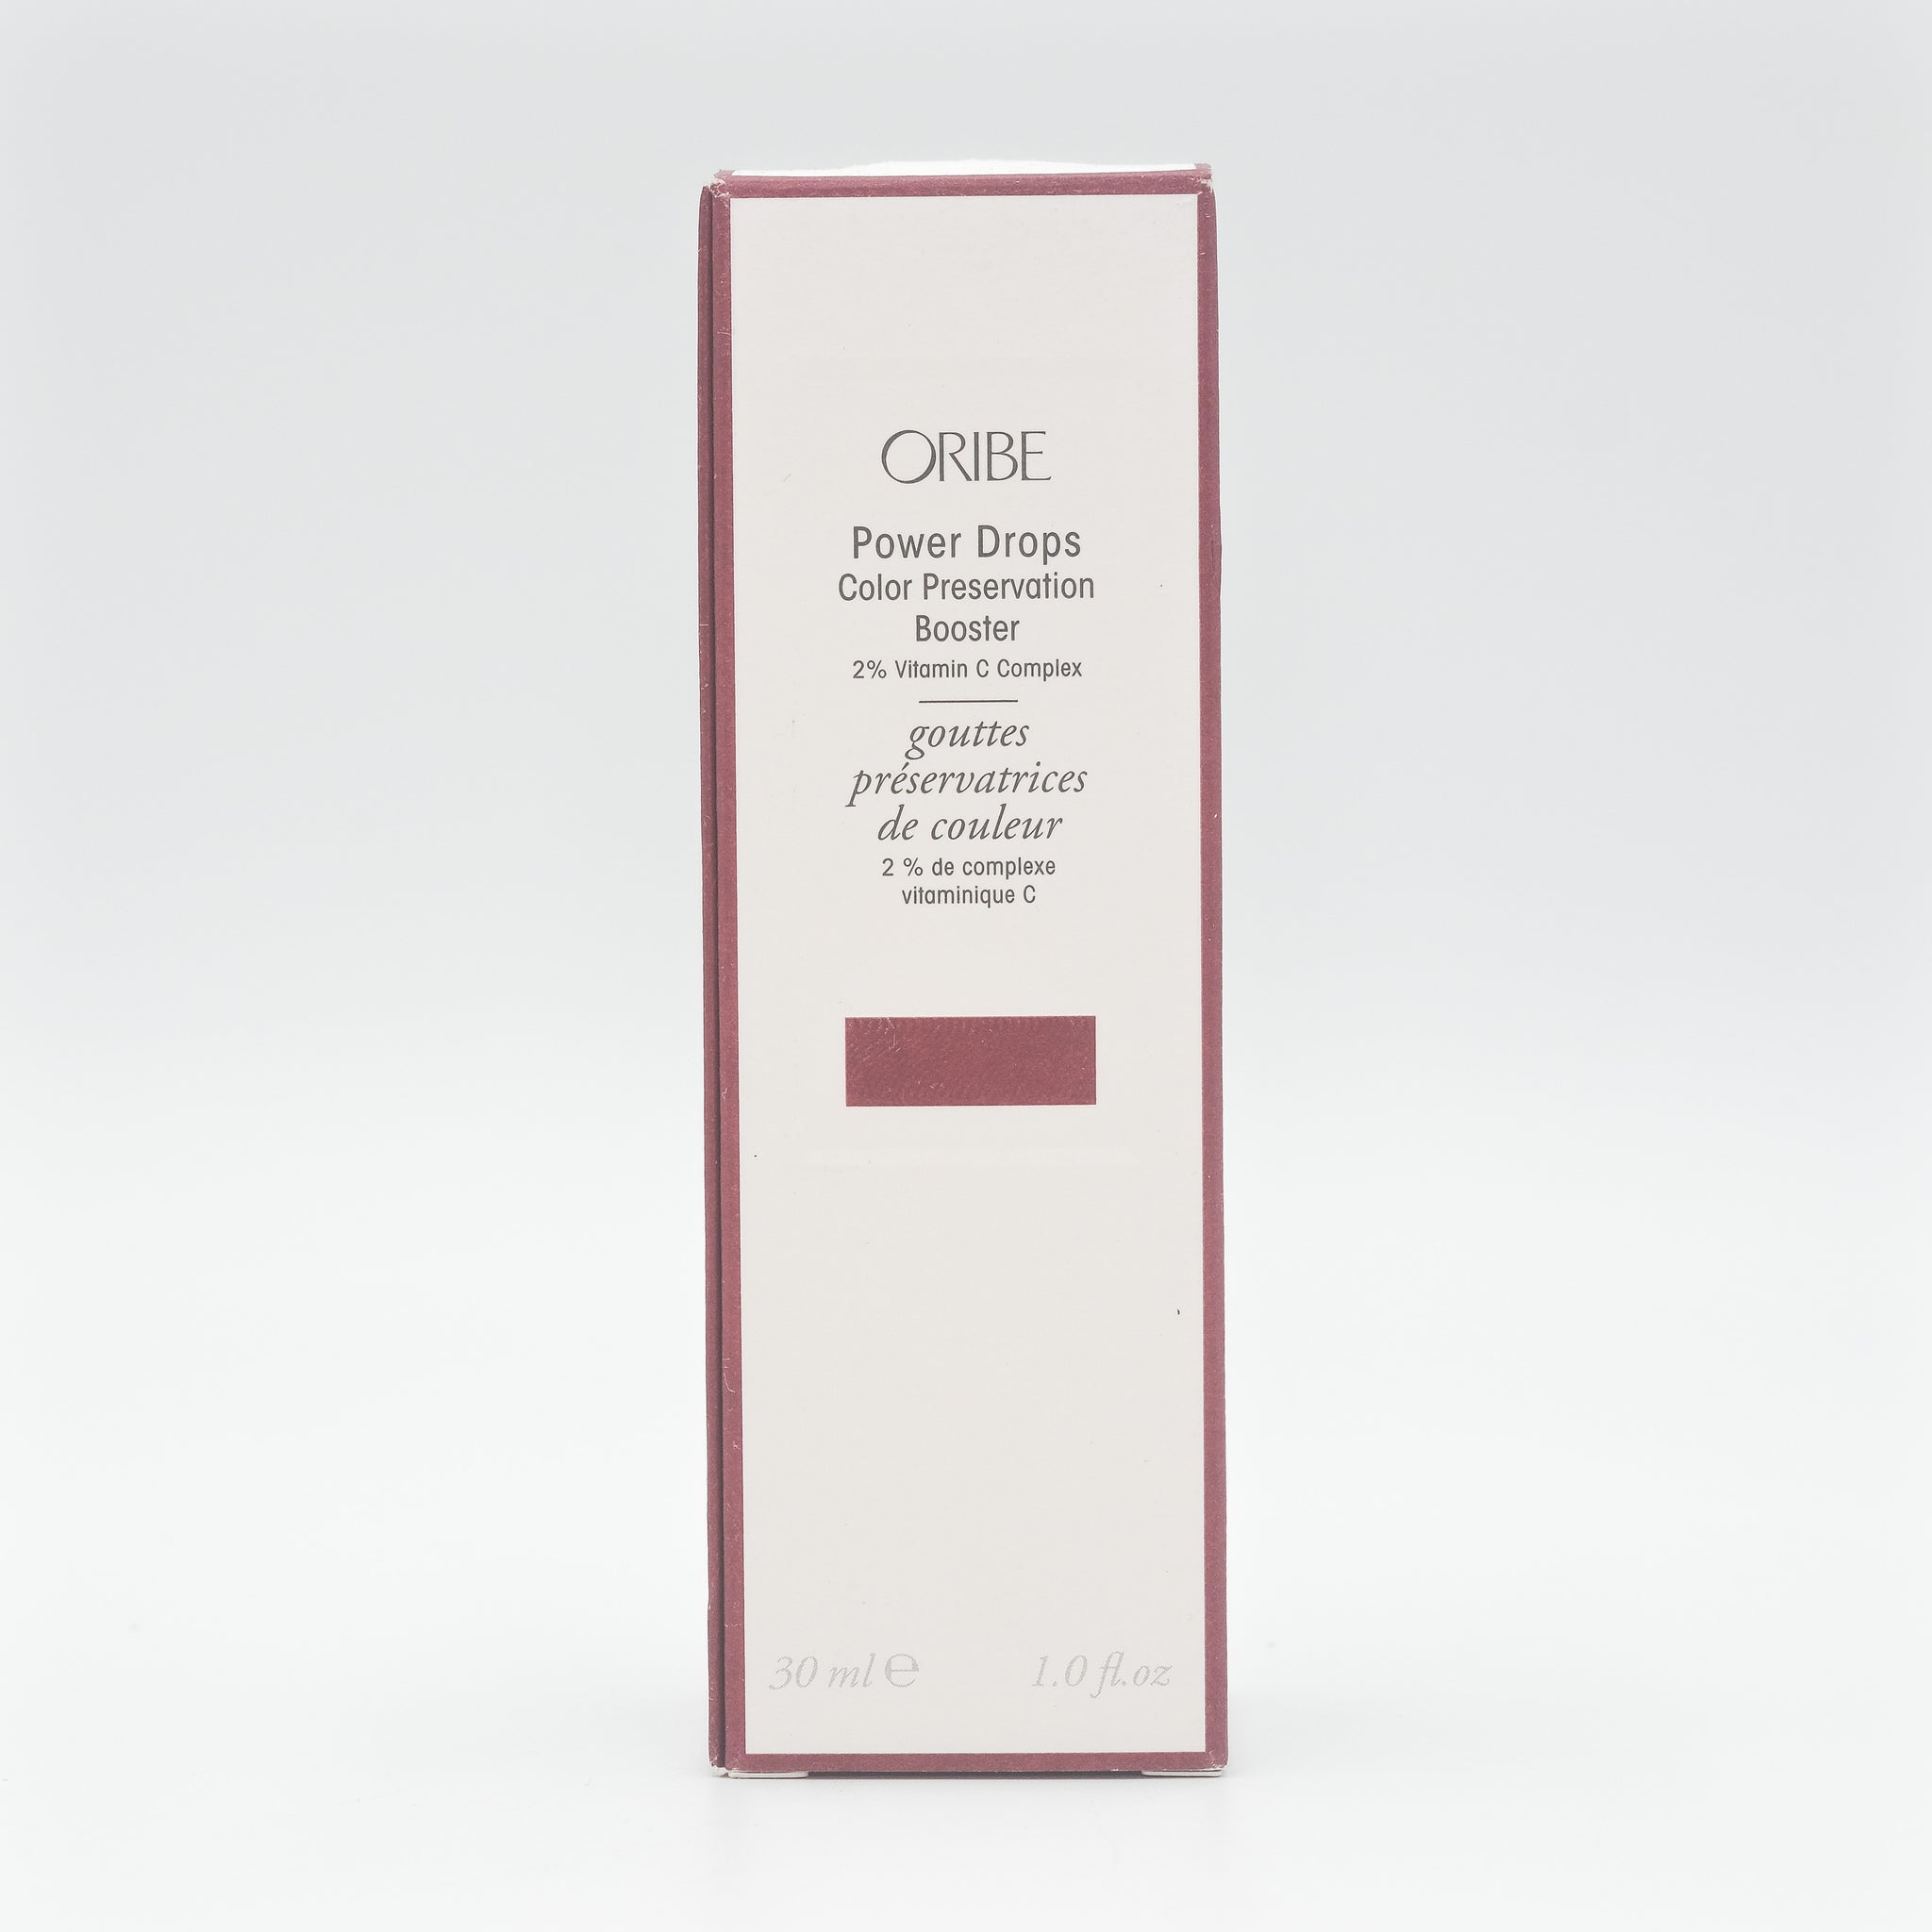 ORIBE Power Drops Color Preservation Booster 1 oz